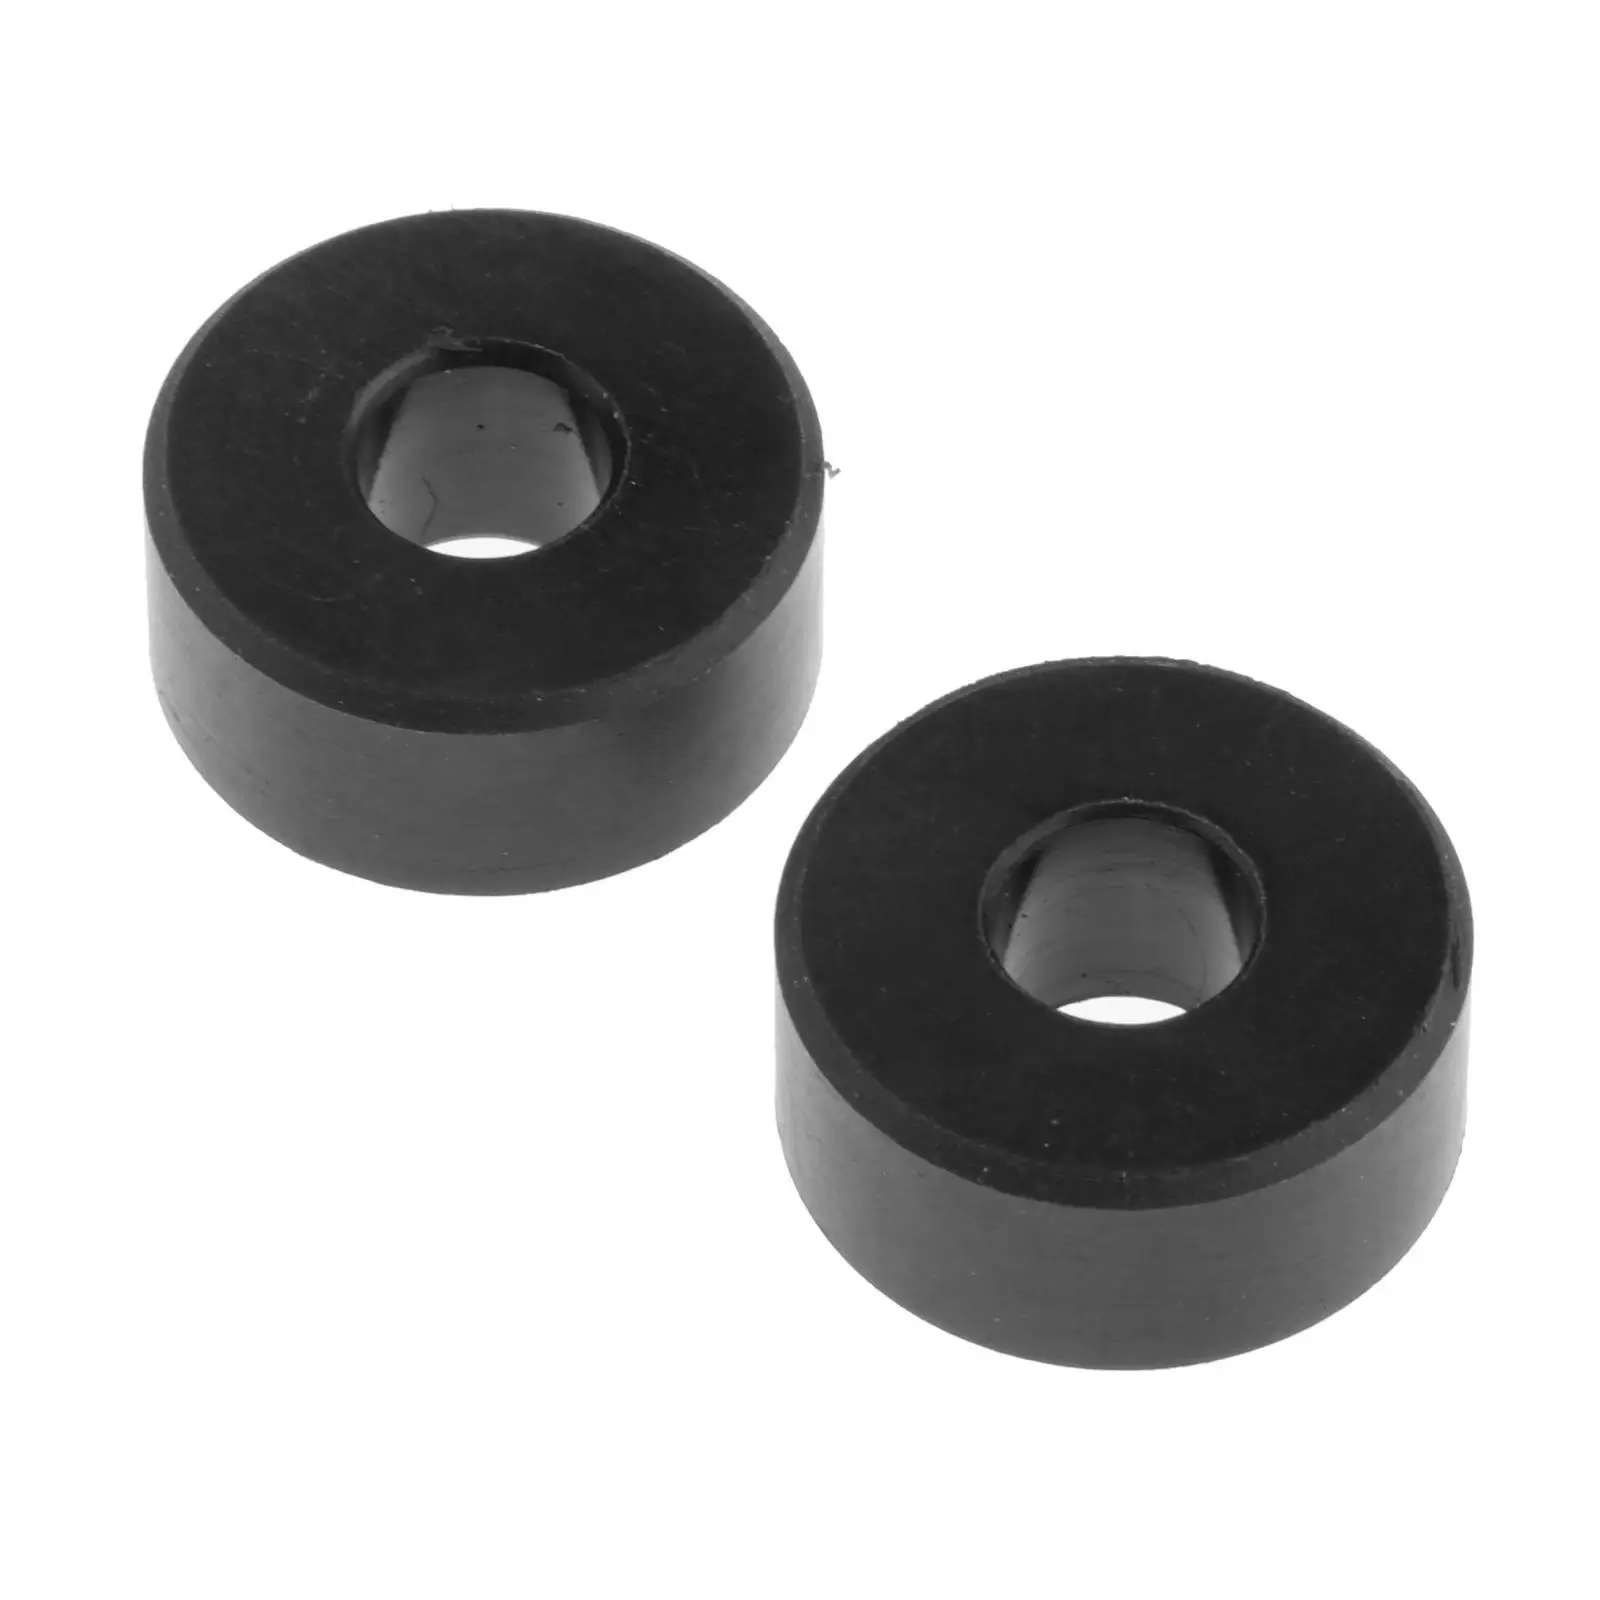 1 Pair Secondary Clutch Rollers for   70,900,325,500,900  -Size Is Approximately 1 